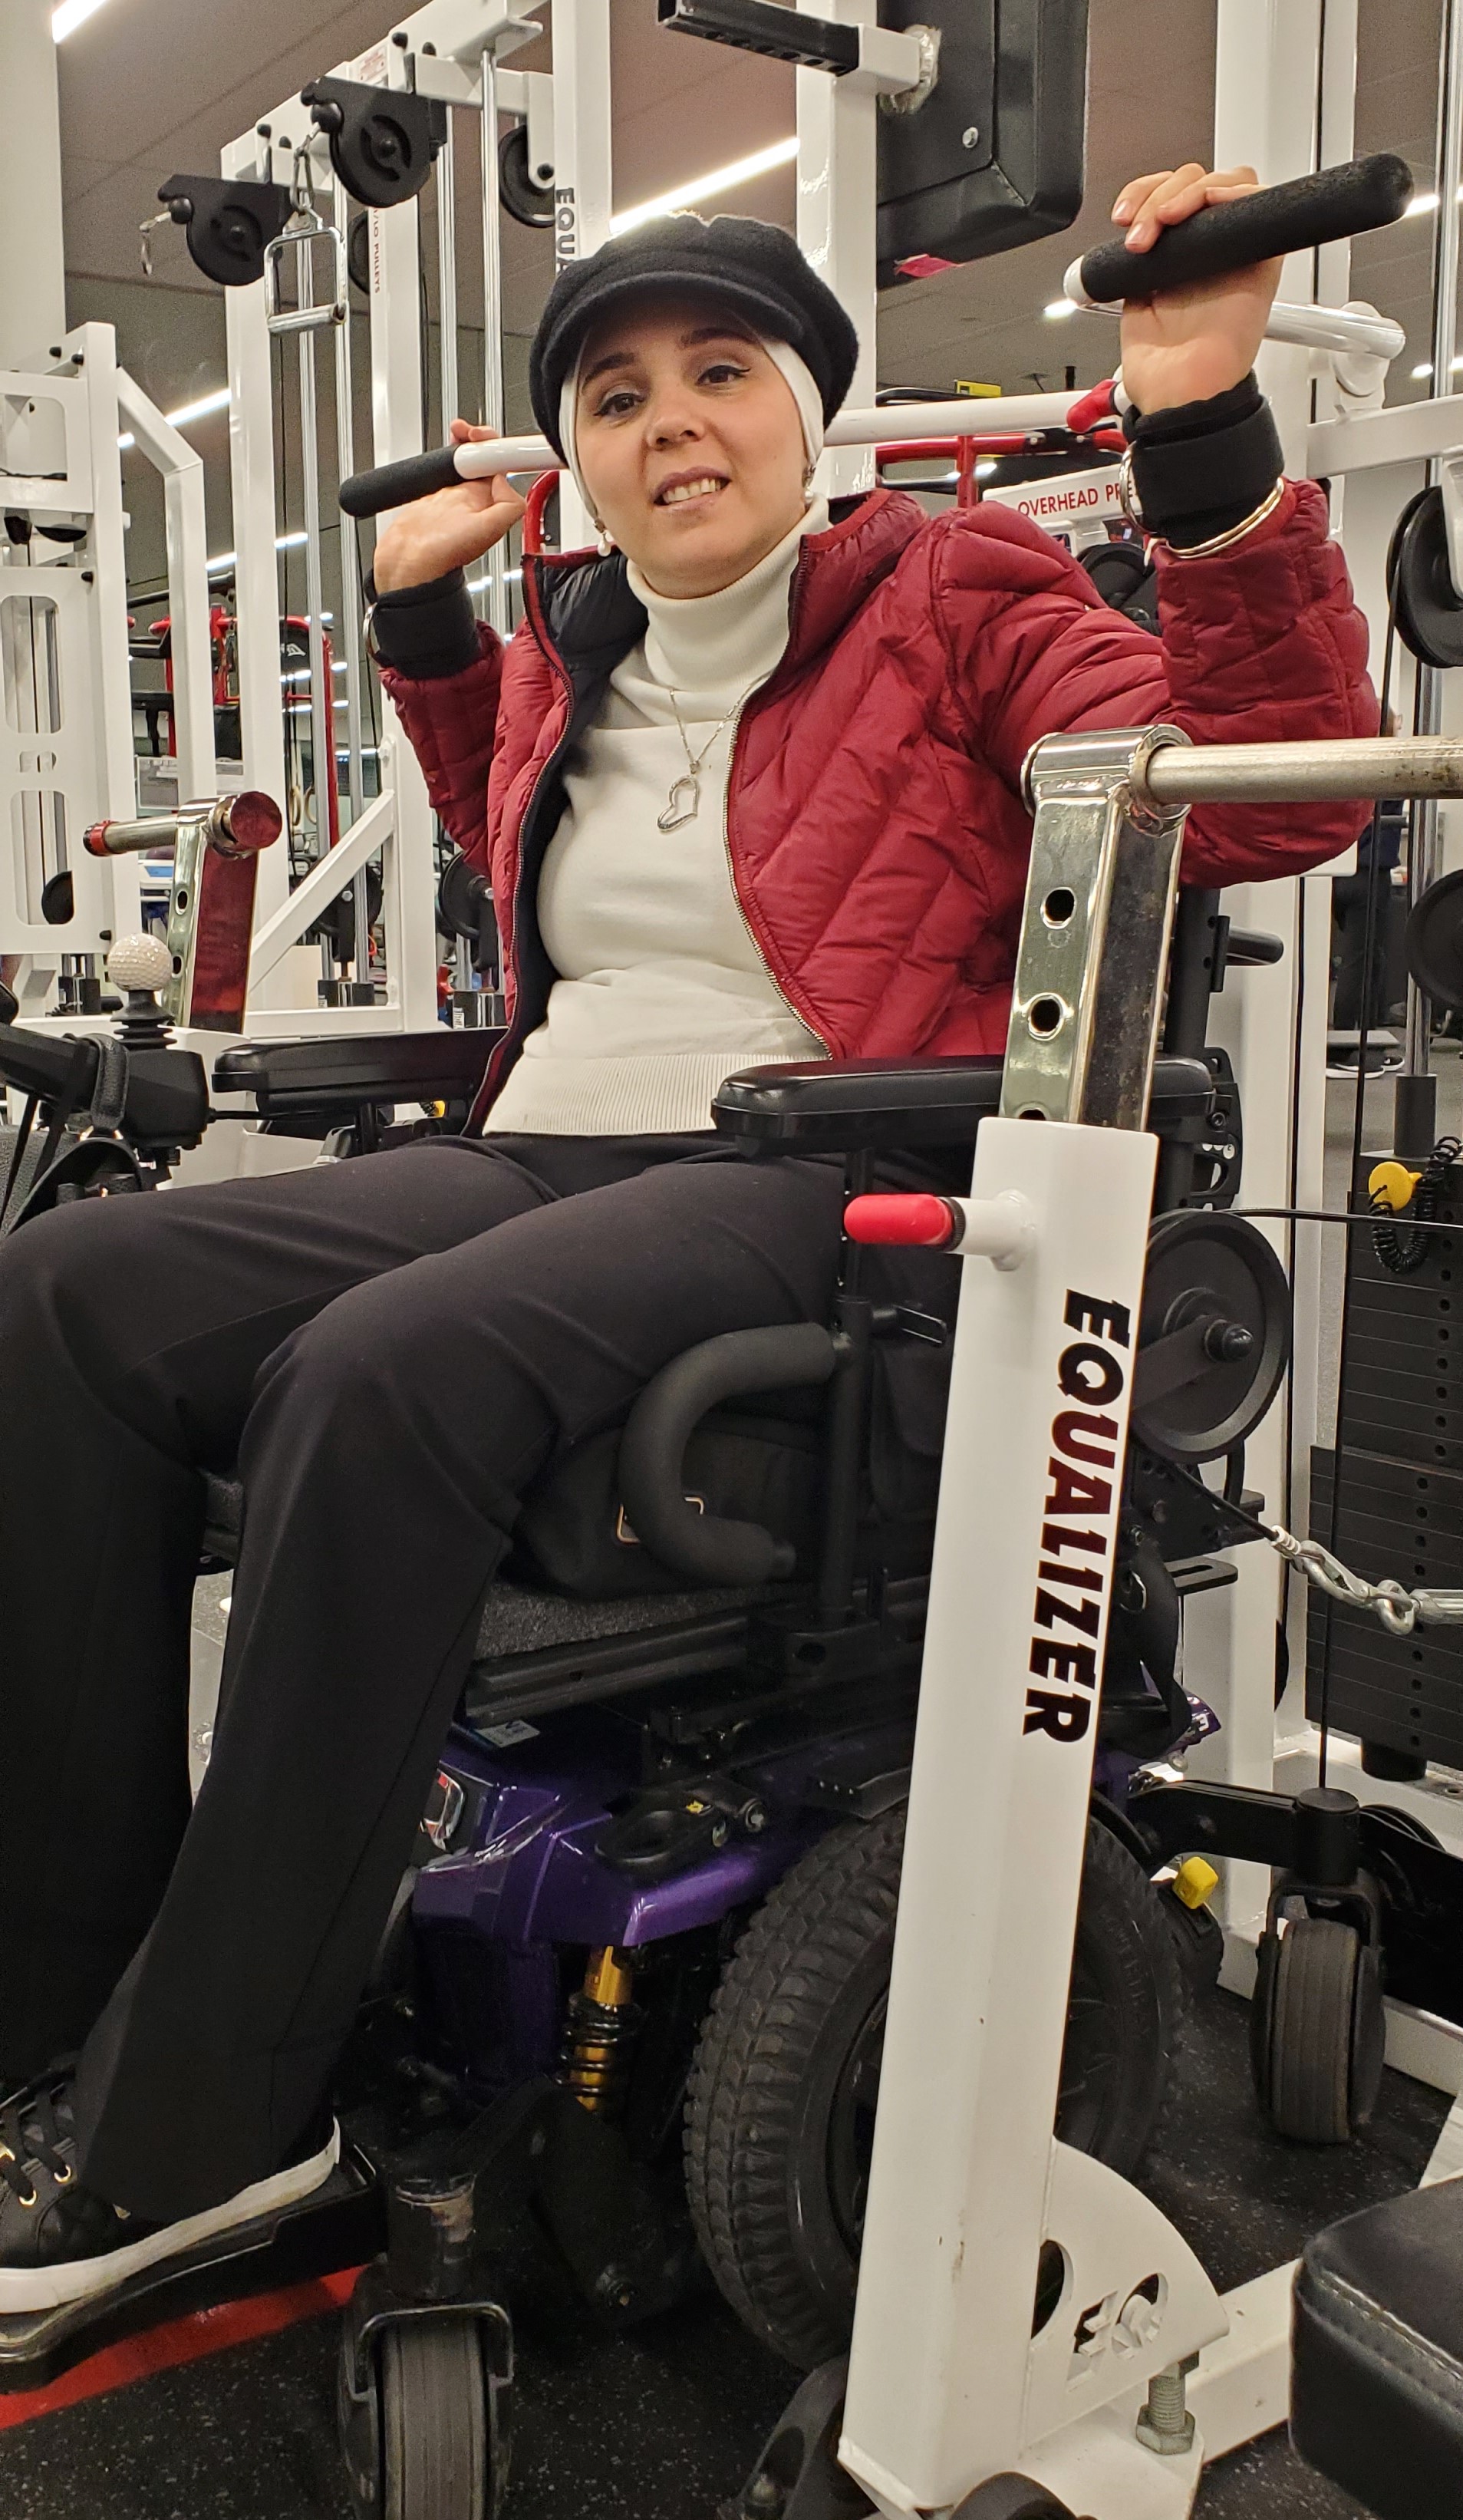 Amani, wearing a red jacket and black hat, is seated on the shoulder press machine. Her arms are up at head level on either side of her, gripping the handles of the machine.